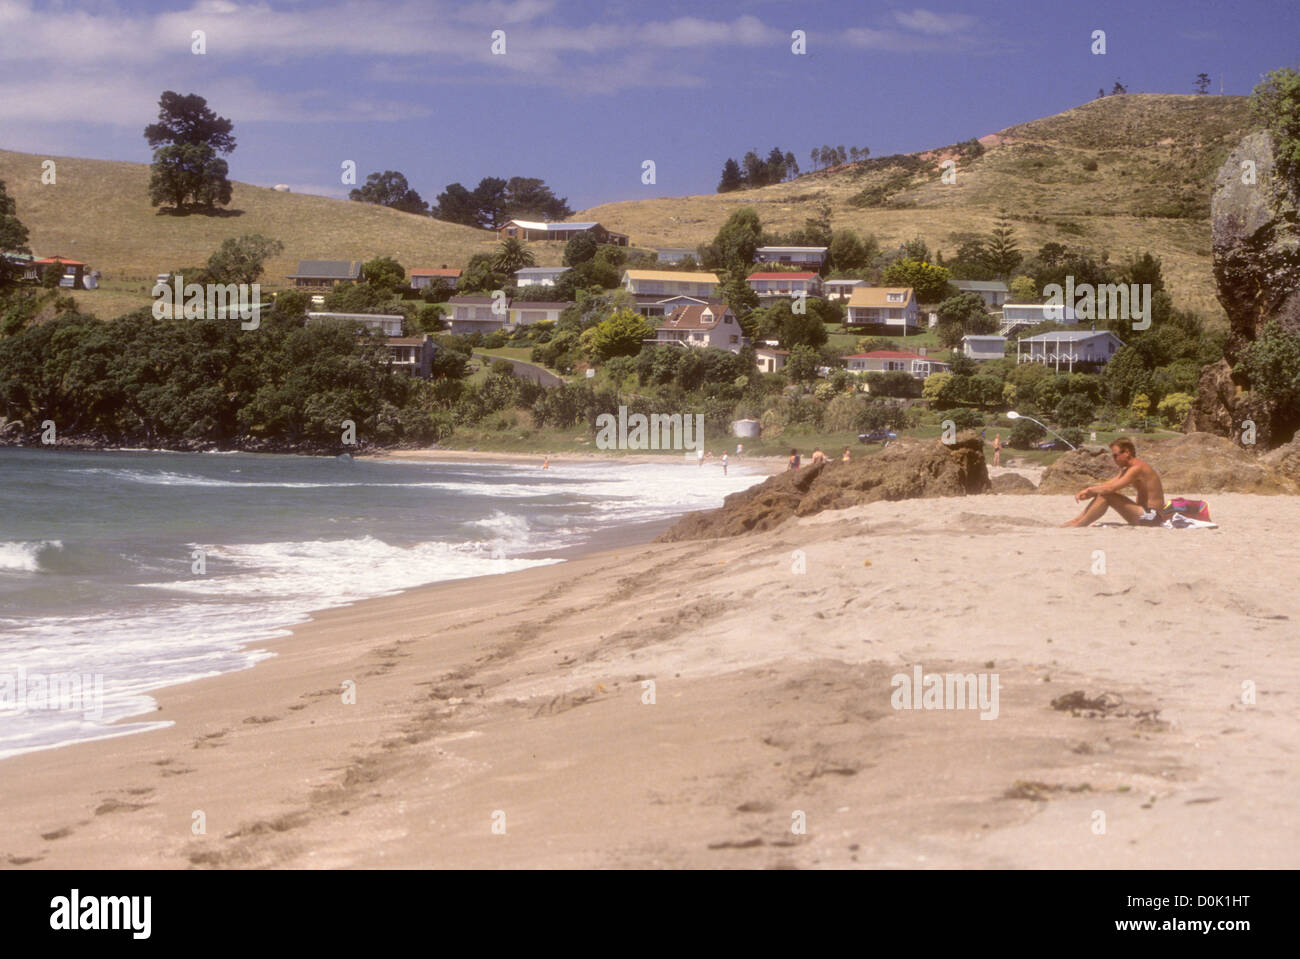 Hot Springs Beach,Hot Water Beach,The beach is a popular destination both for locals and tourists visiting. New Zealand Stock Photo